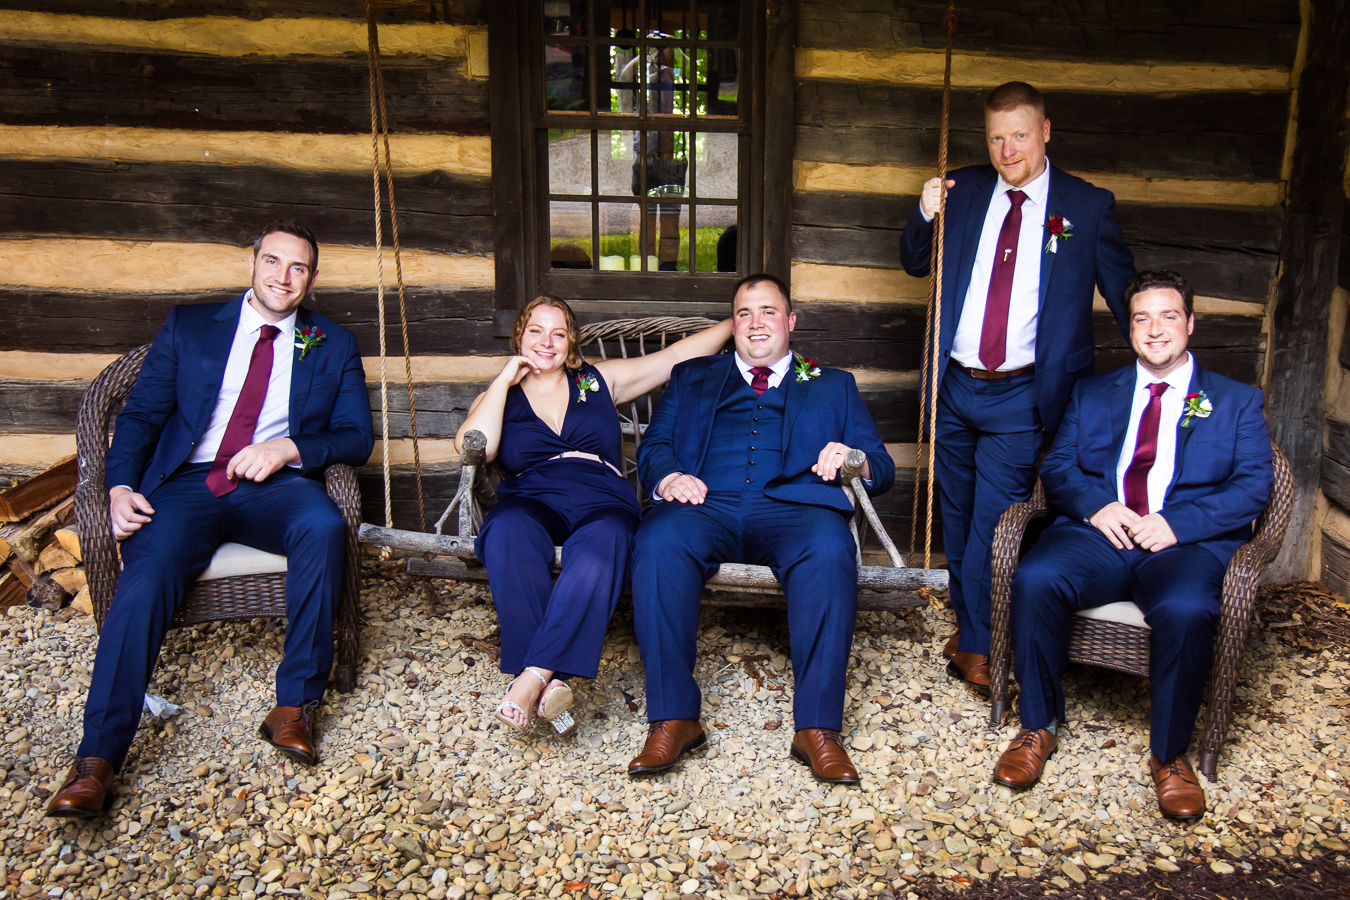 this Pittsburgh wedding photographer captures this unique wedding party featuring the best woman and the rest of the guys sitting on an outdoor swing in their vibrant navy attire